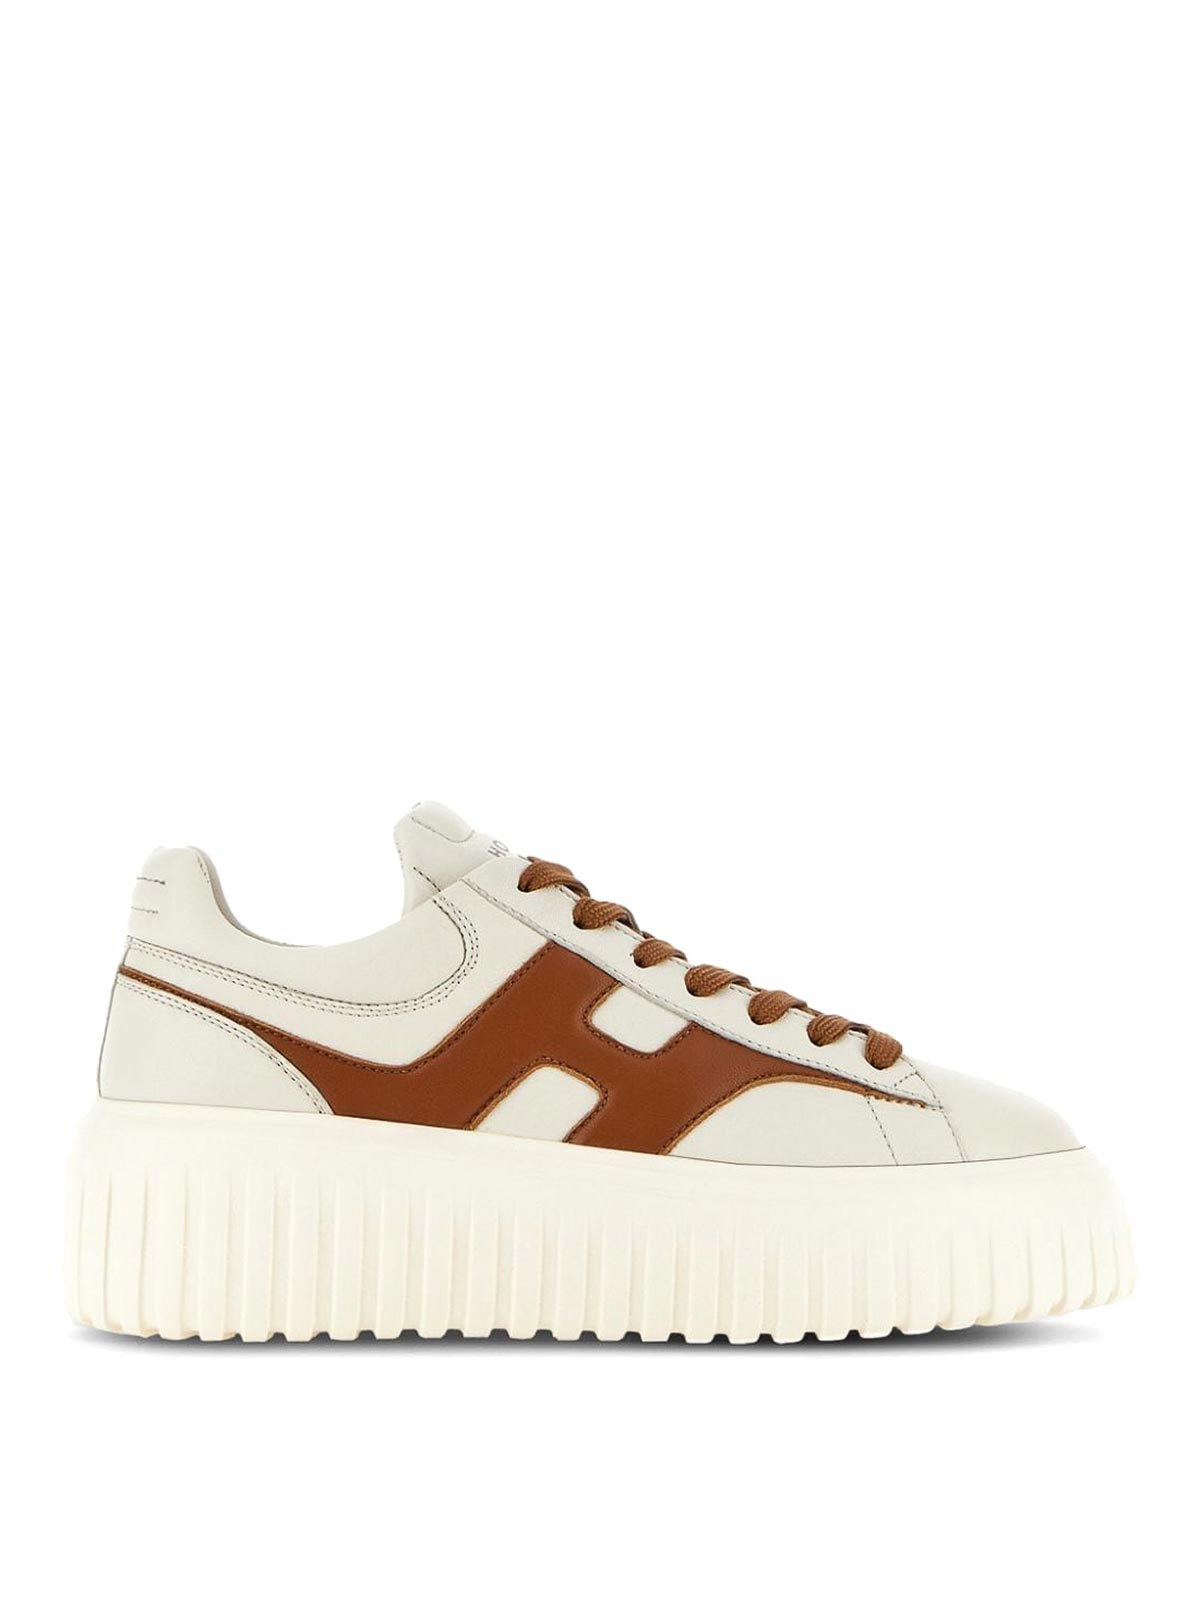 Hogan H-stripes Leather Sneakers In Brown